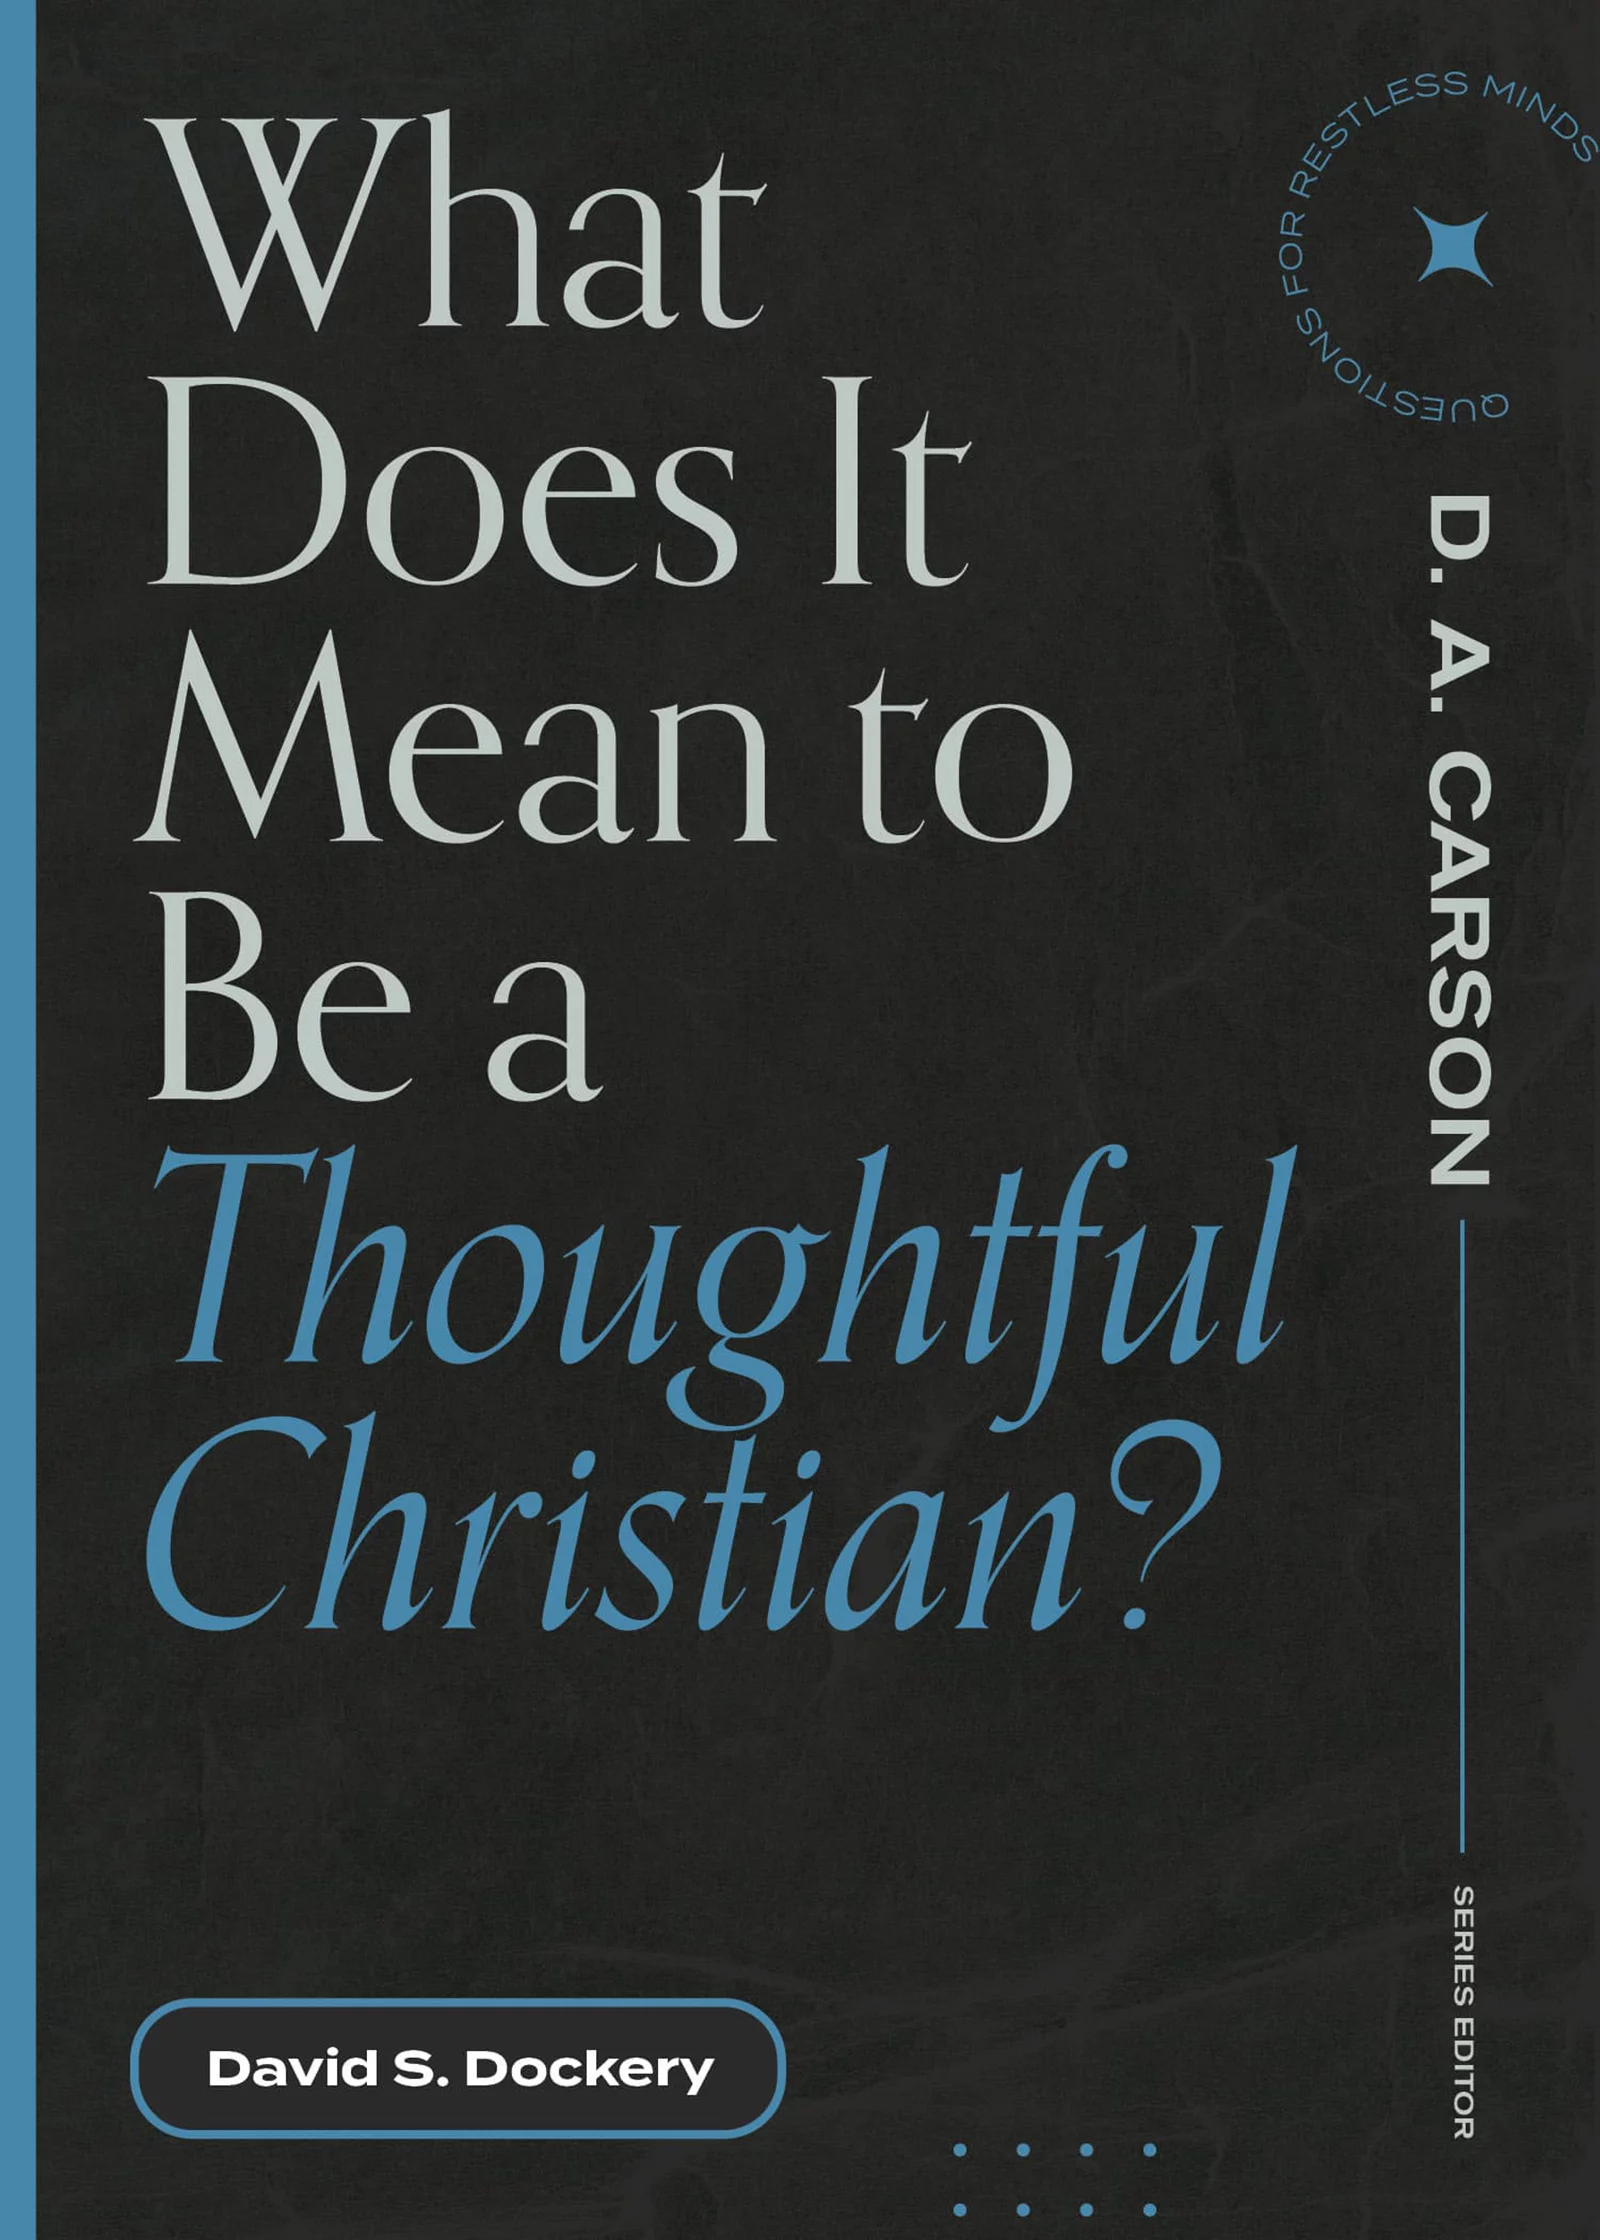  2022/08/What-does-it-mean-to-be-a-thoughful-Christian.webp 